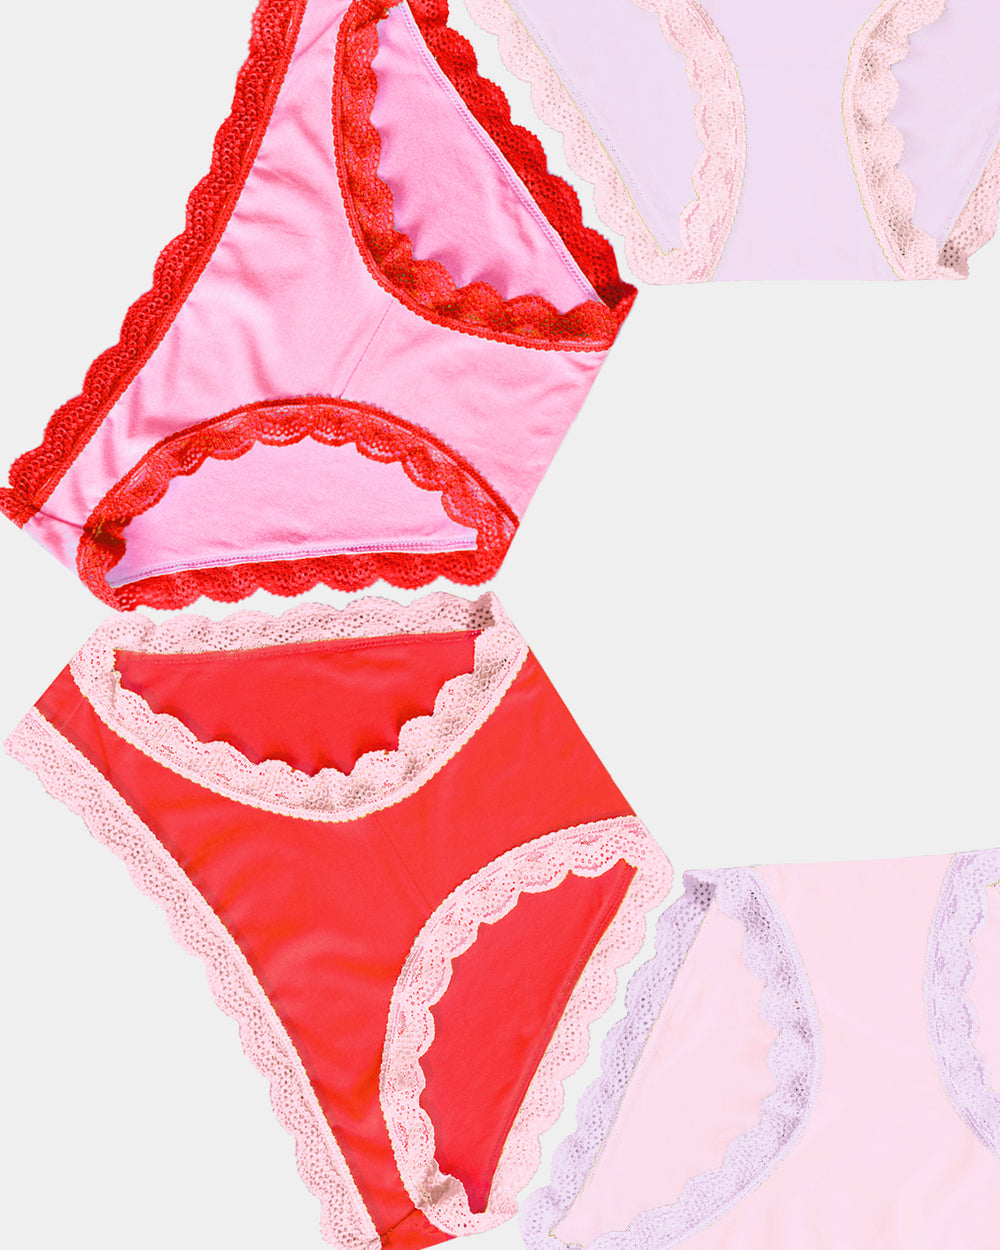 The Original Knicker Four Pack - Pink and Red Contrast Stripe & Stare